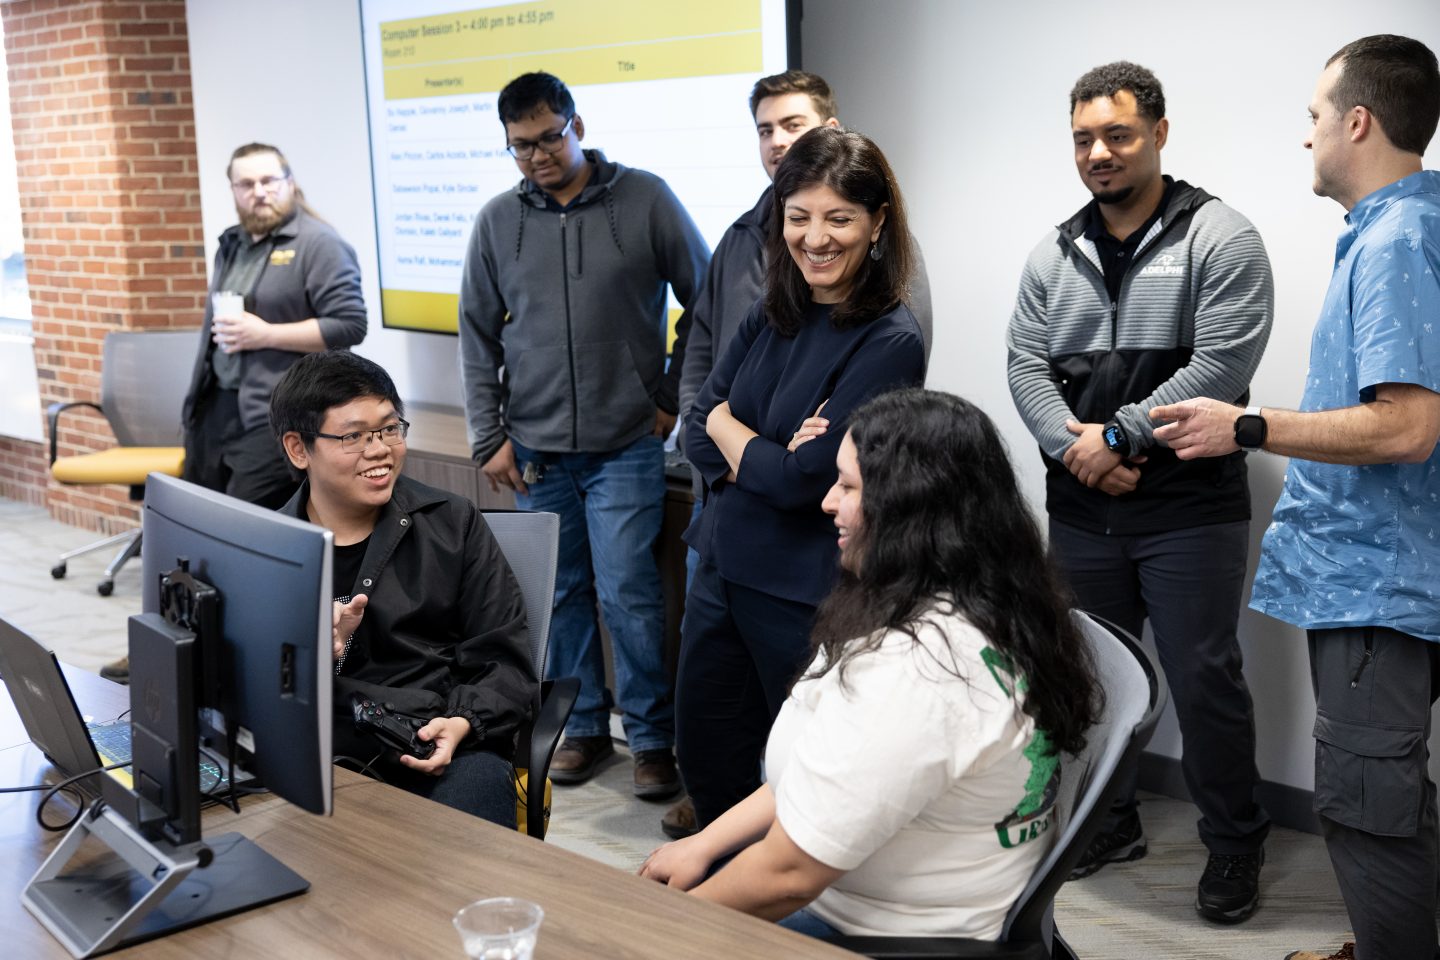 A diverse group of students and adults—two women and six men—are gathered near a computer terminal. A man, seated, and two women, one seated, are in a discussion and smiling, as the others stand by a wall with a large video screen. 